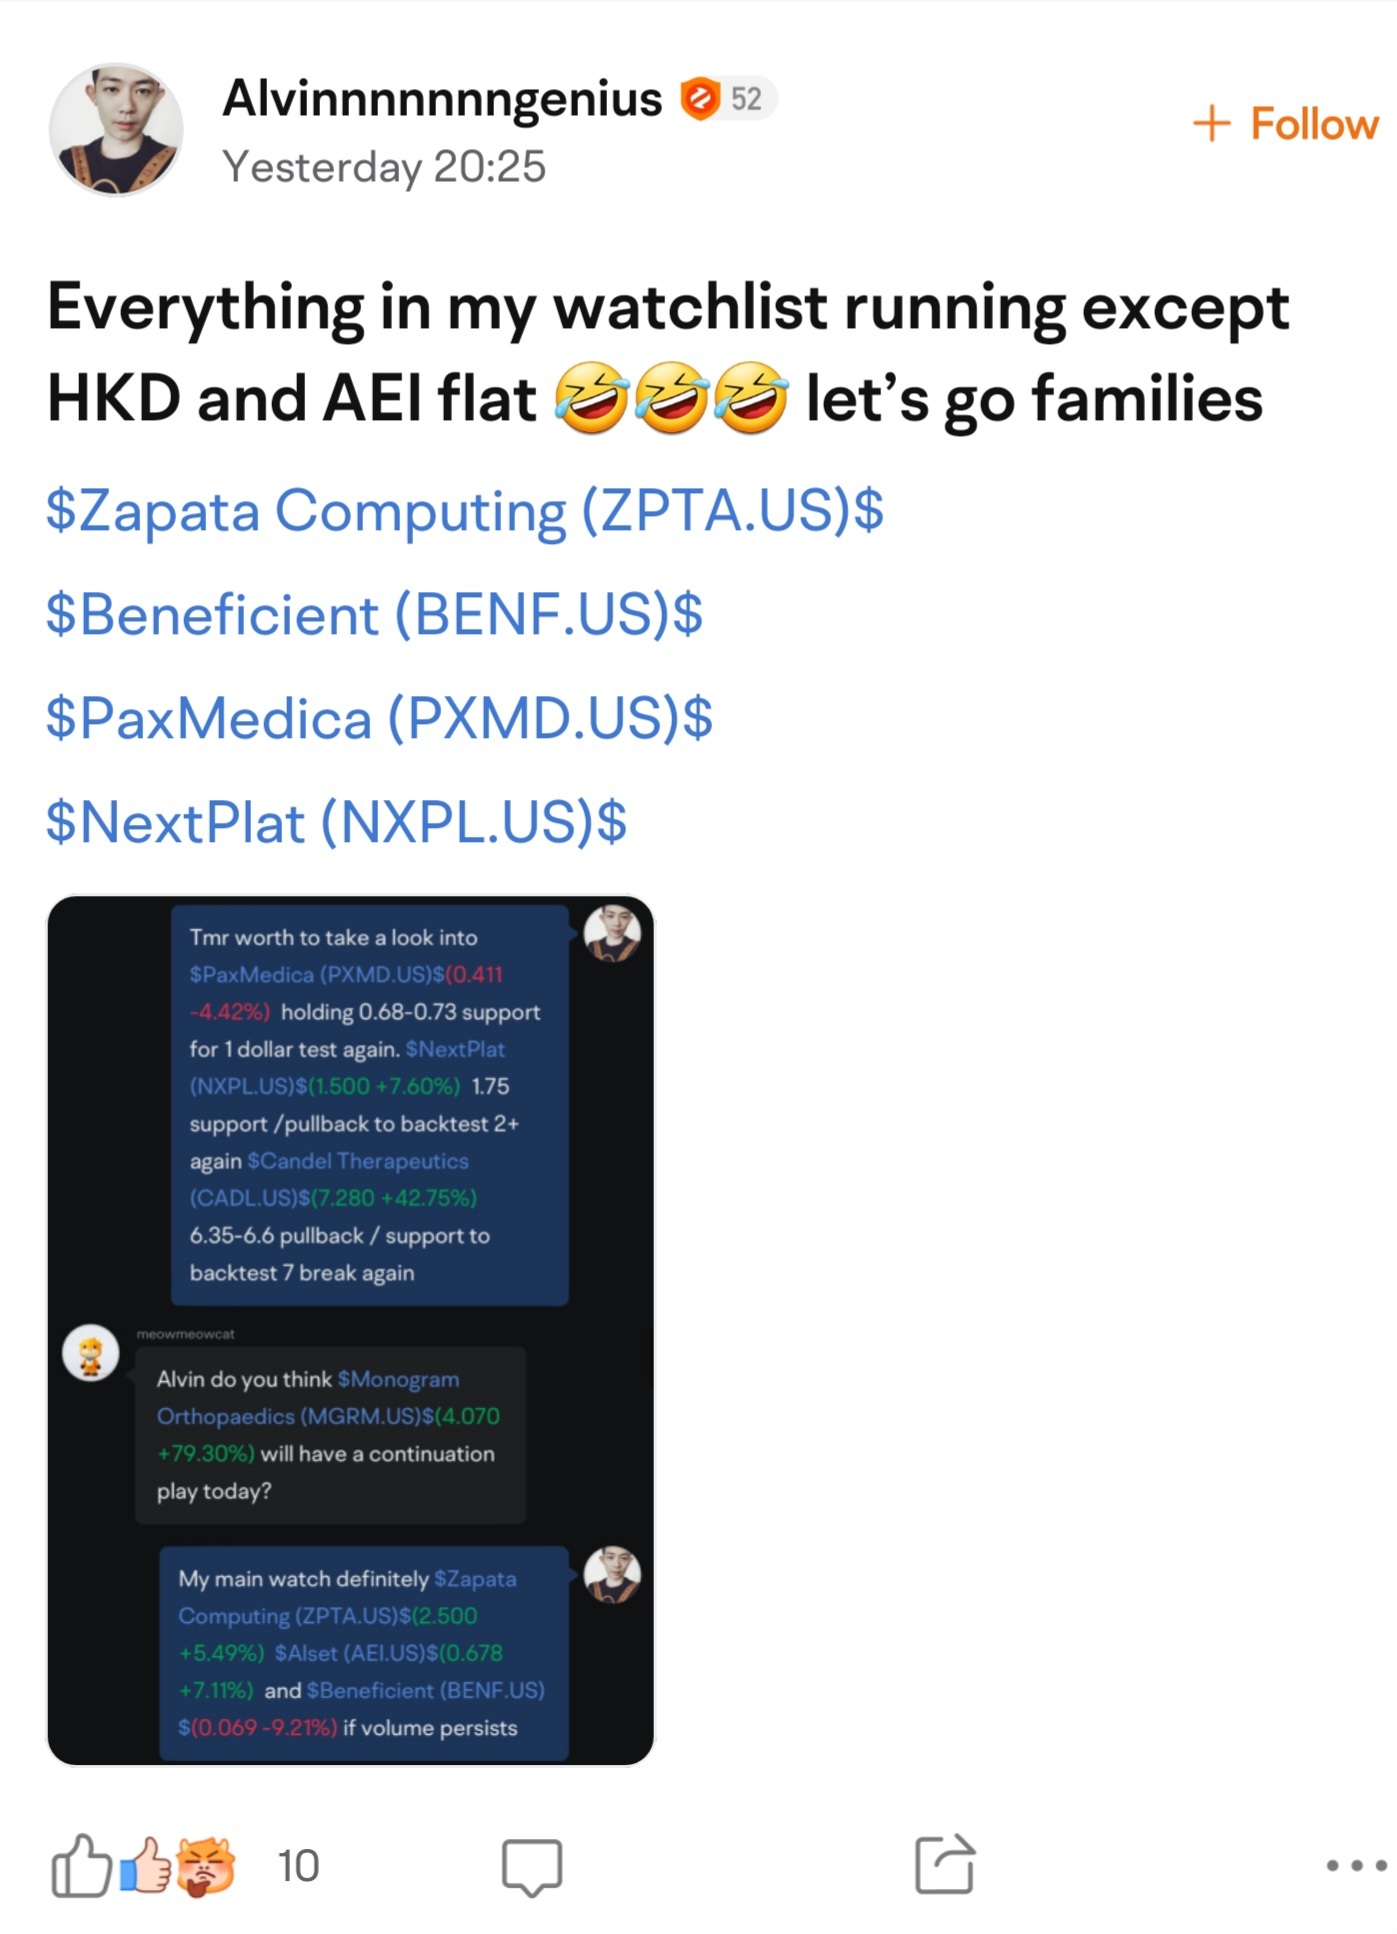 $PaxMedica (PXMD.US)$$Beneficient (BENF.US)$$Zapata Computing (ZPTA.US)$$NextPlat (NXPL.US)$ This guy has been wrong and misled many times. That's why he had to...